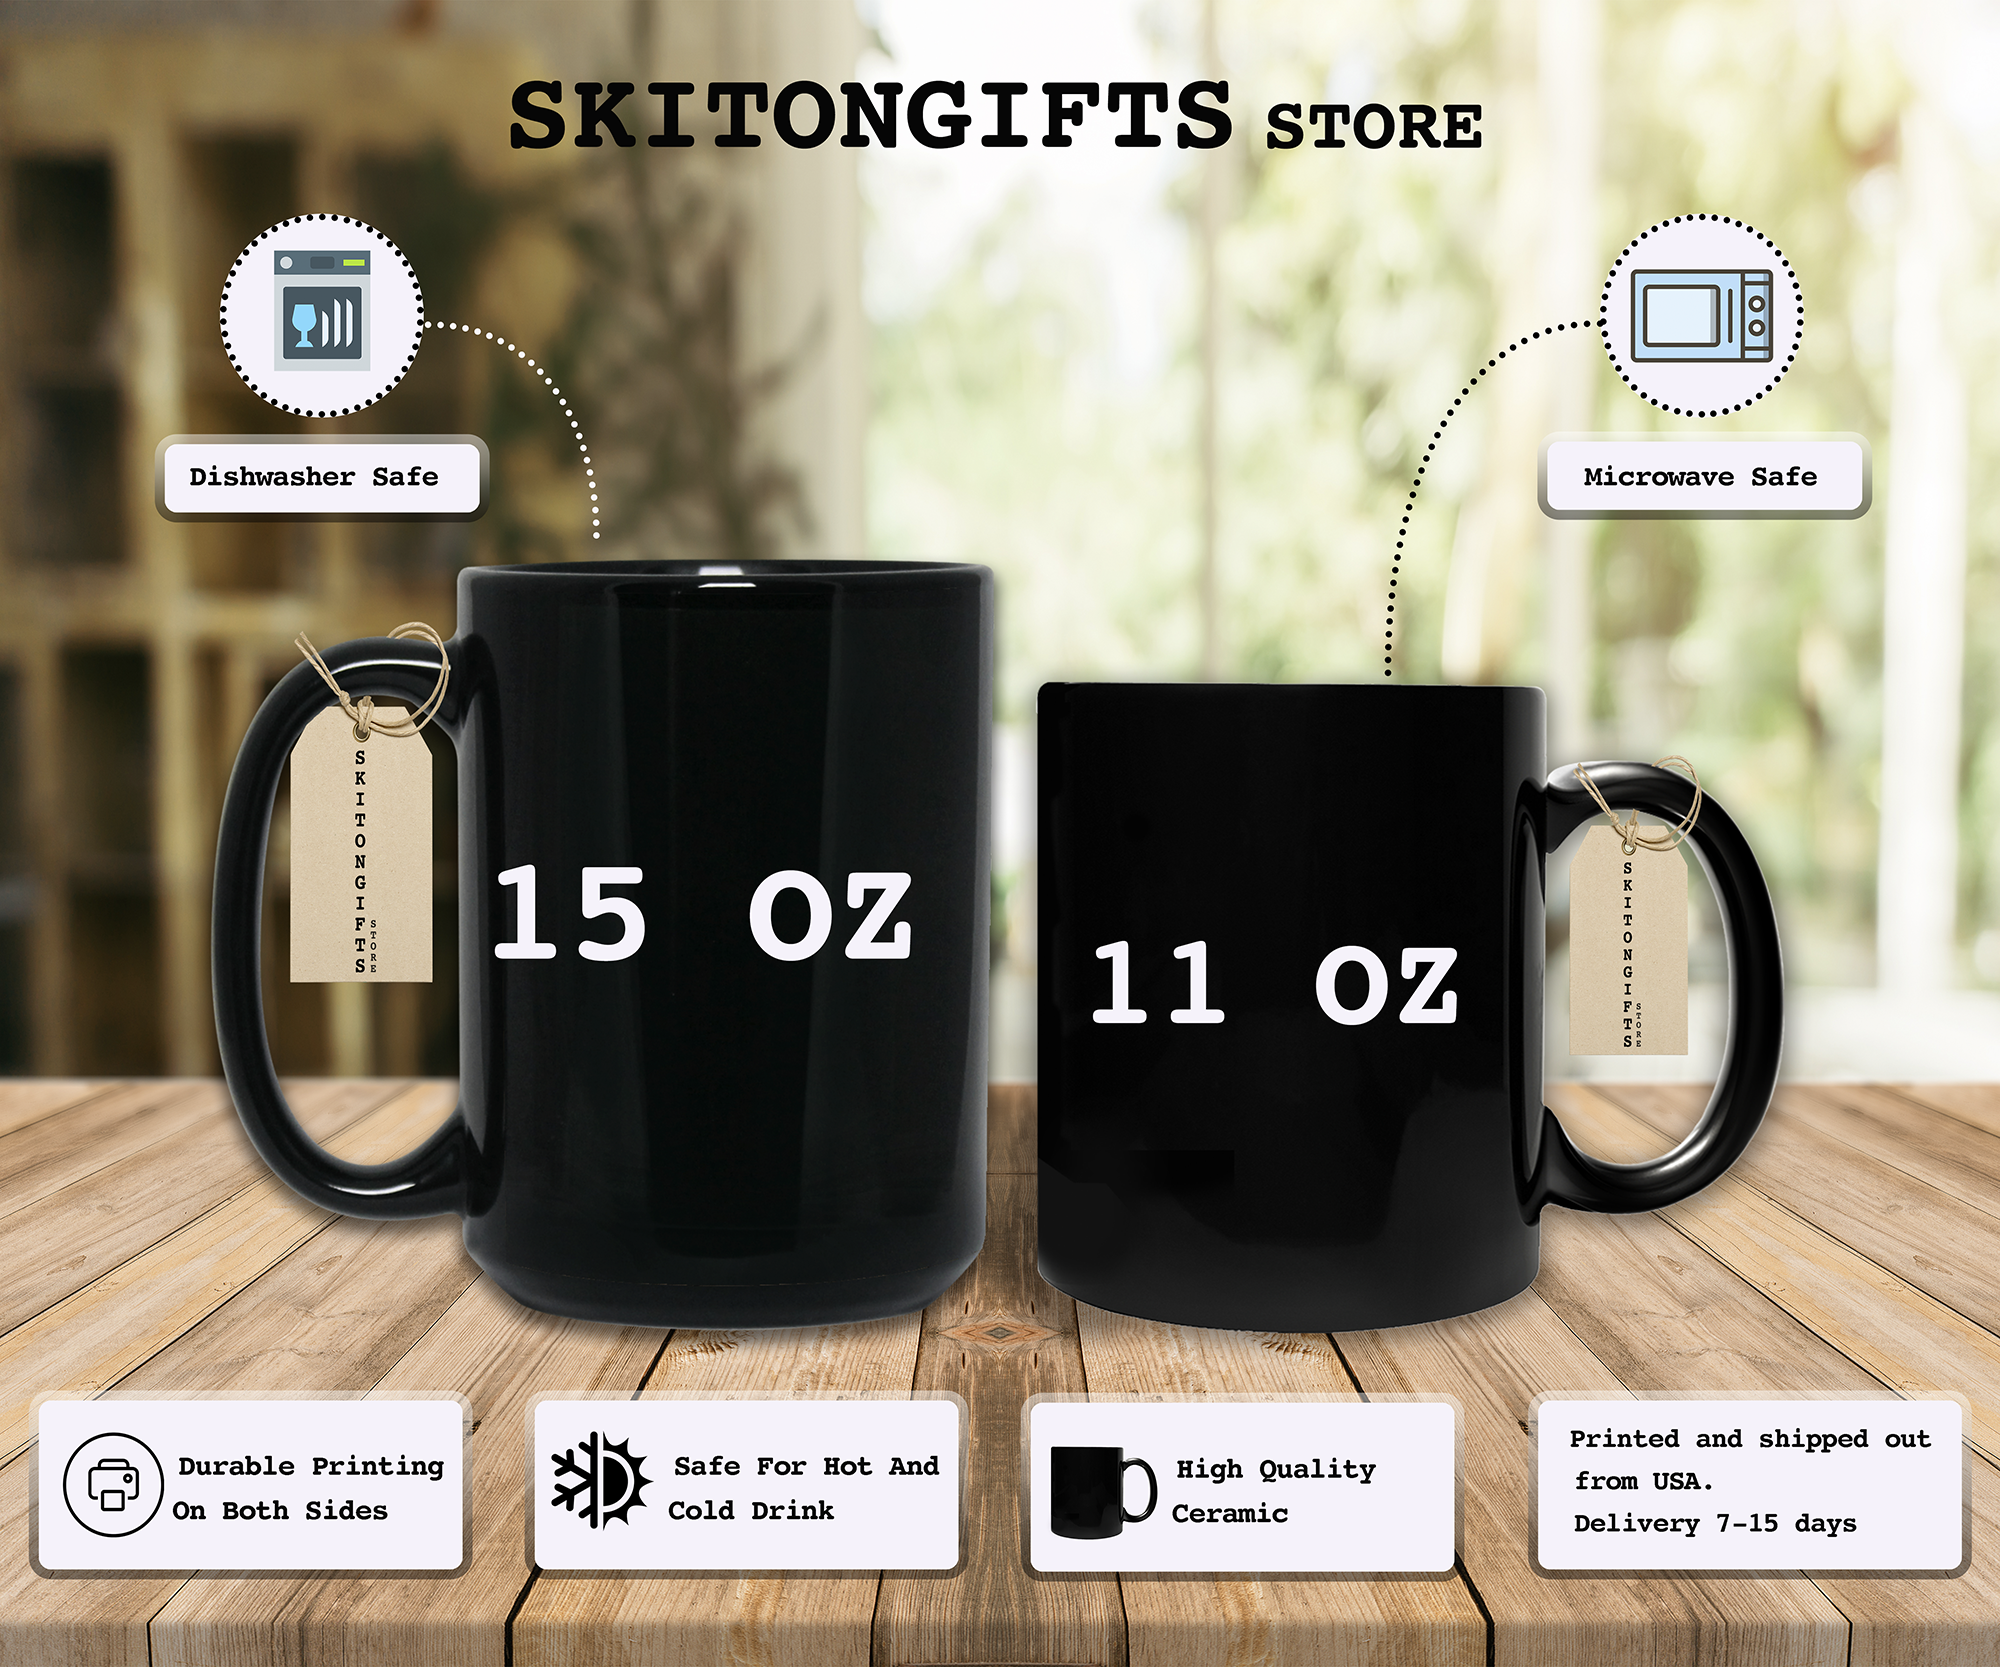 Skitongifts Funny Ceramic Coffee Mug For Birthday, Mother's Day, Father's Day, Christmas NH081221-Hip Surgery Recovery Uprjq2N